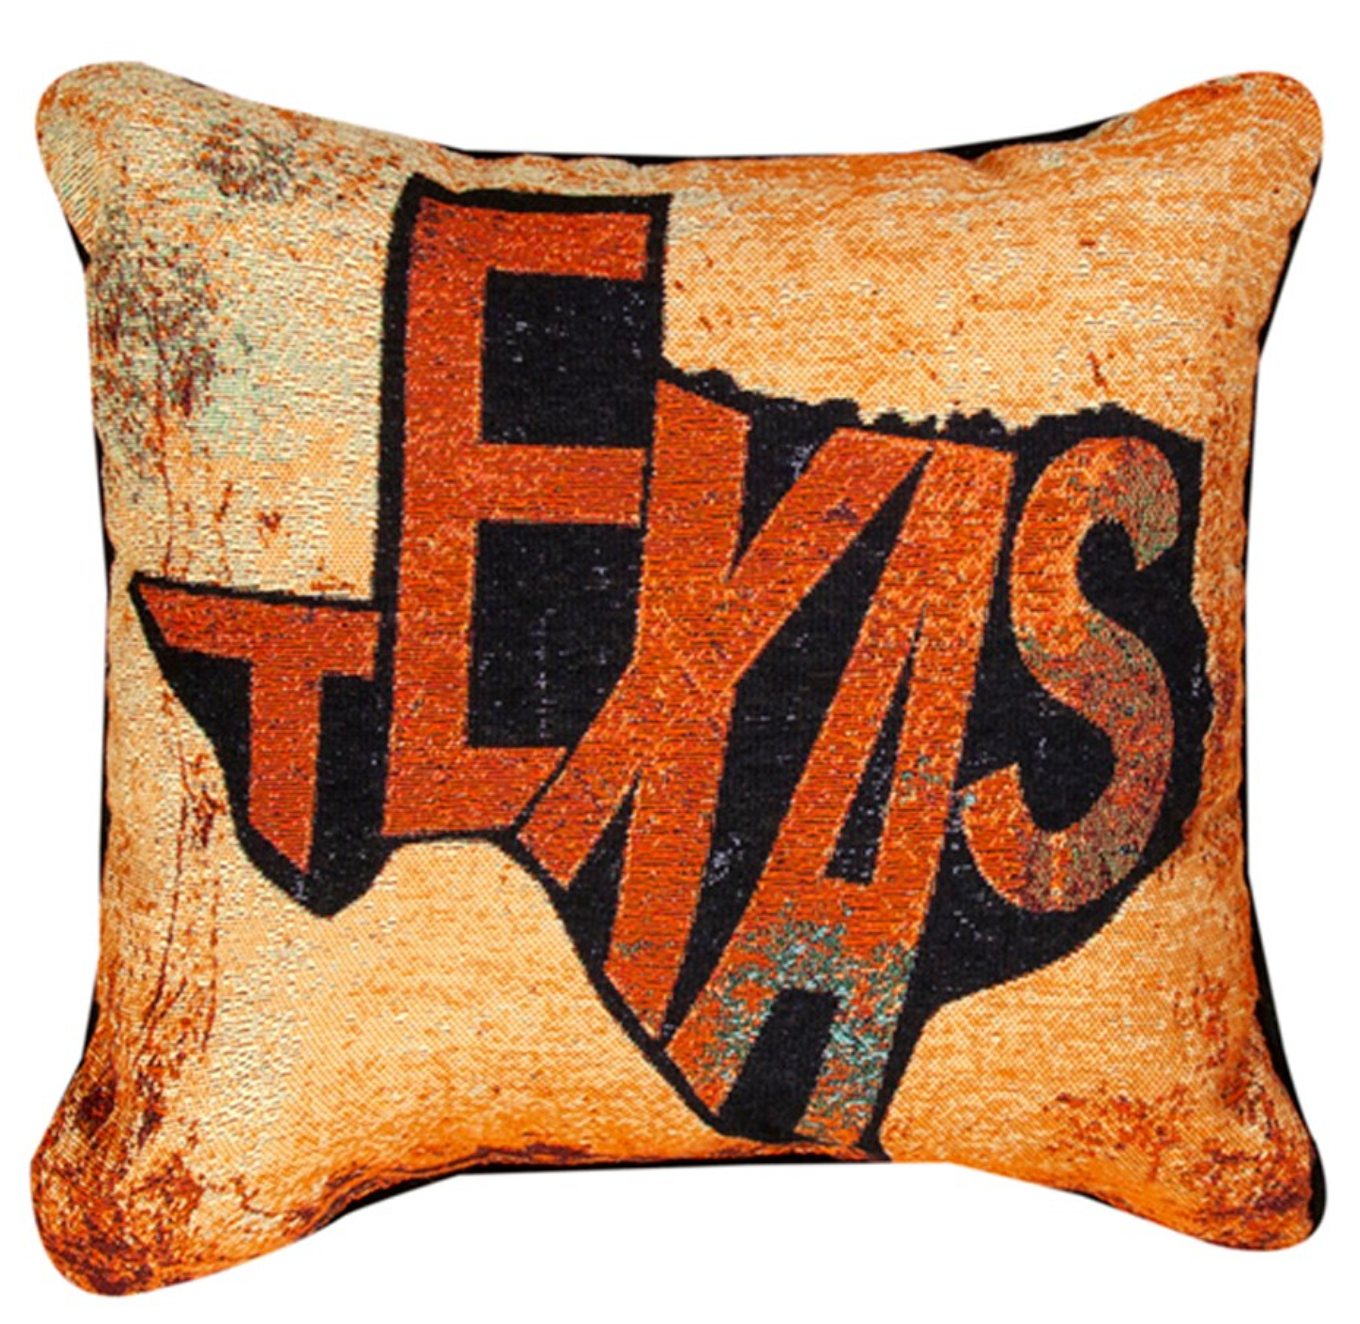 State of Texas Pillow